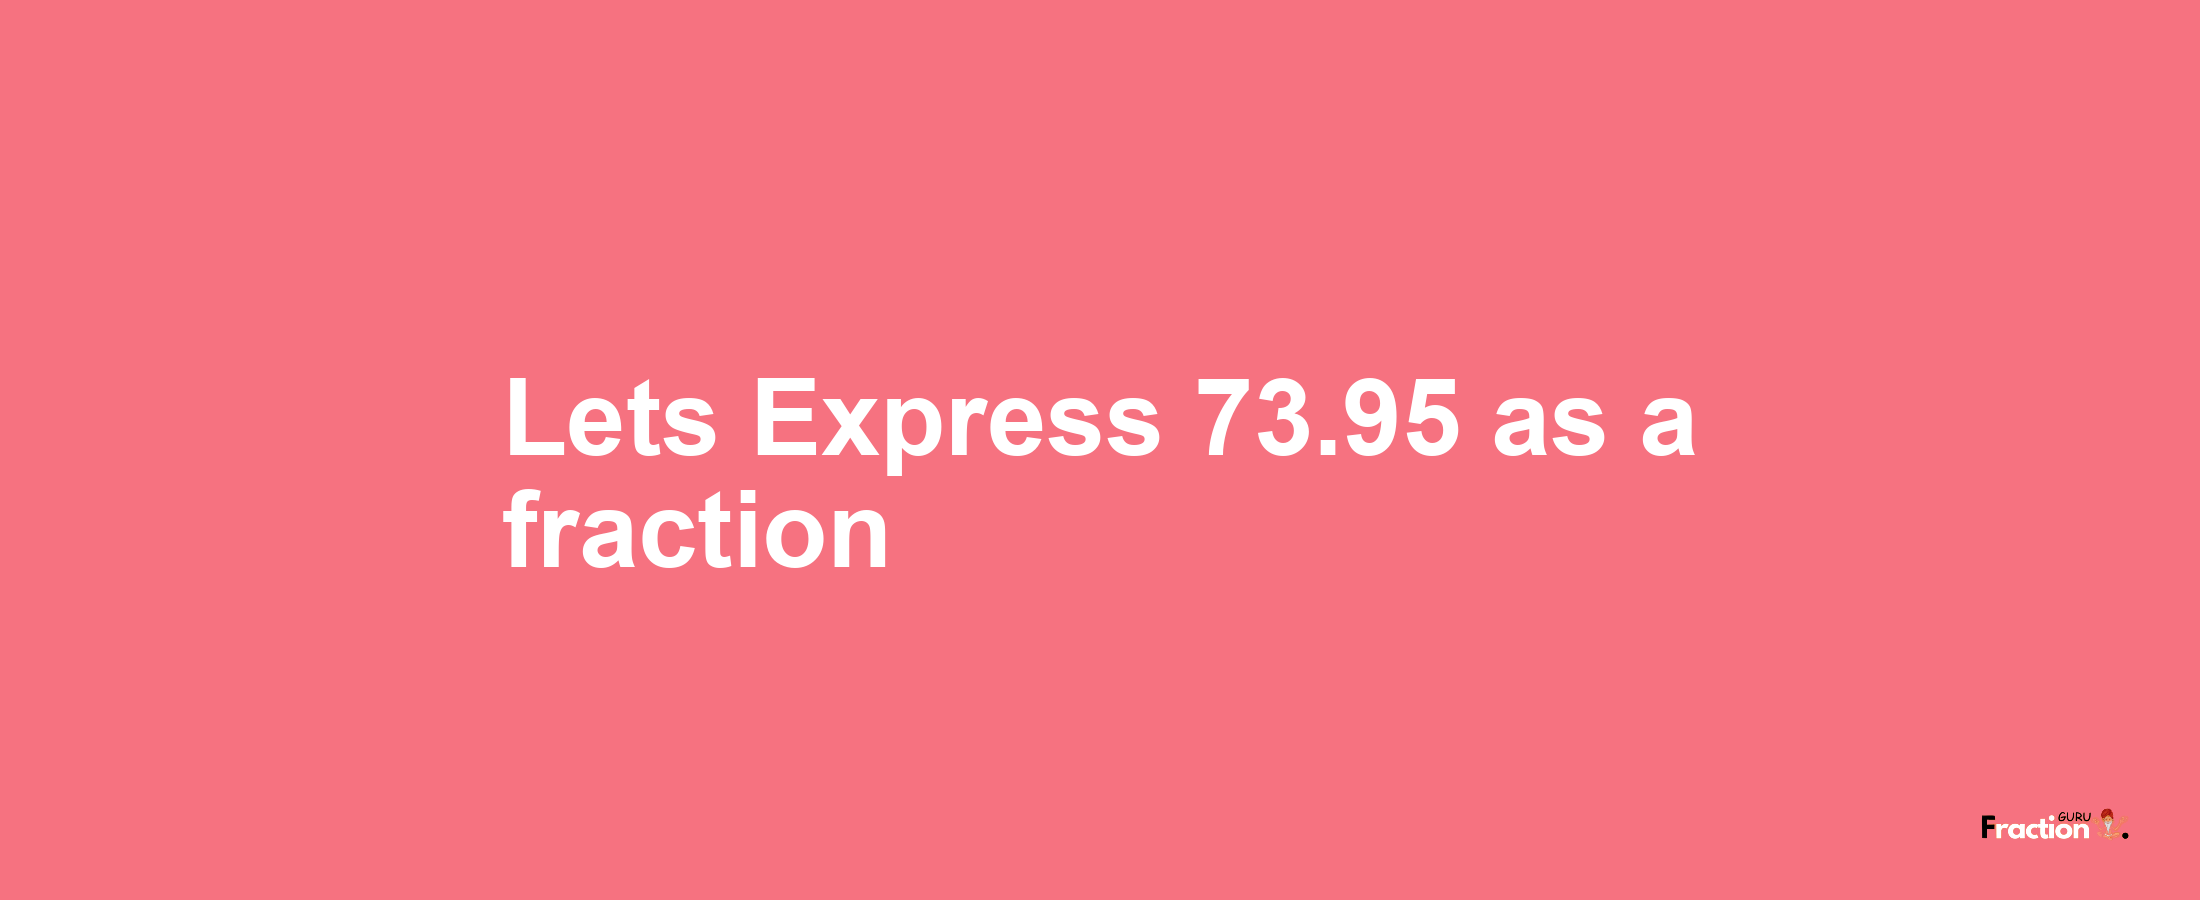 Lets Express 73.95 as afraction